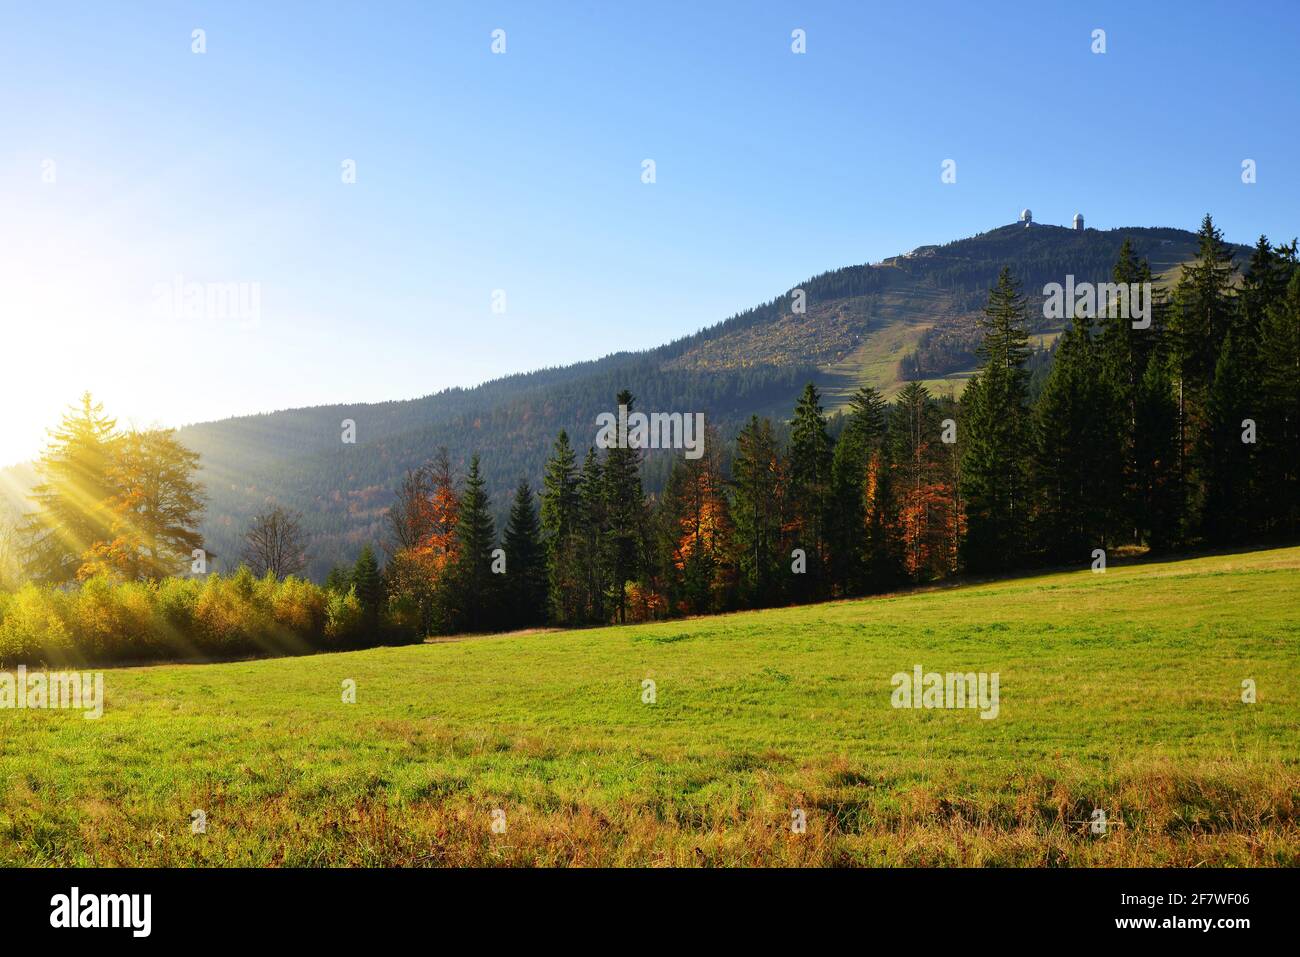 Autumn landscape in Bavarian Forest National Park. View of the mountain peak Grosser Arber, Germany, Europe. Stock Photo